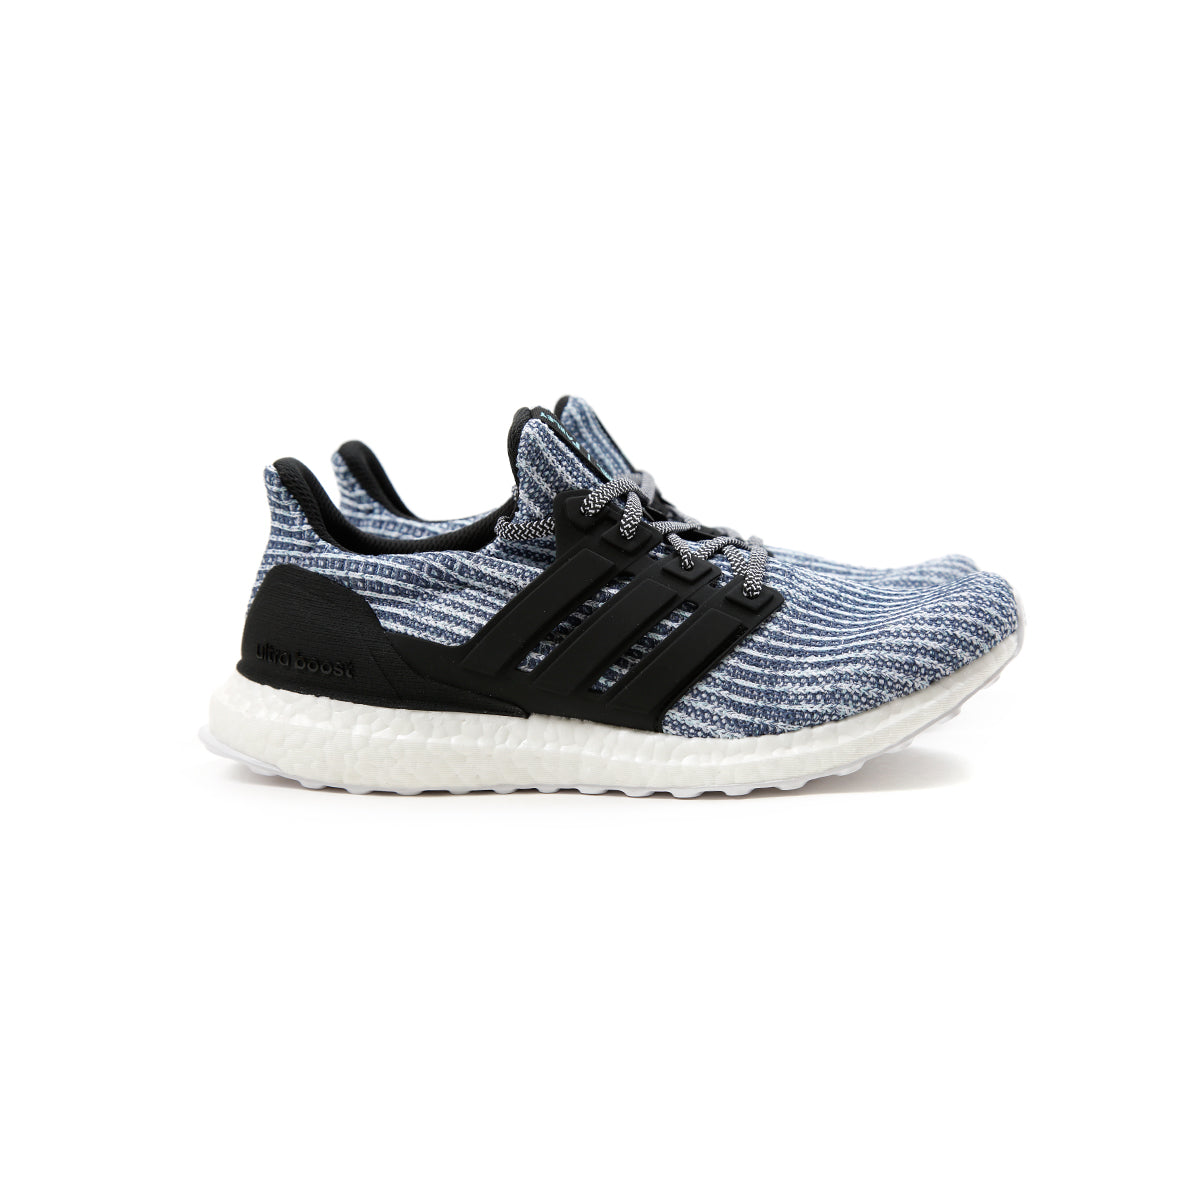 adidas ultra boost parley white blue